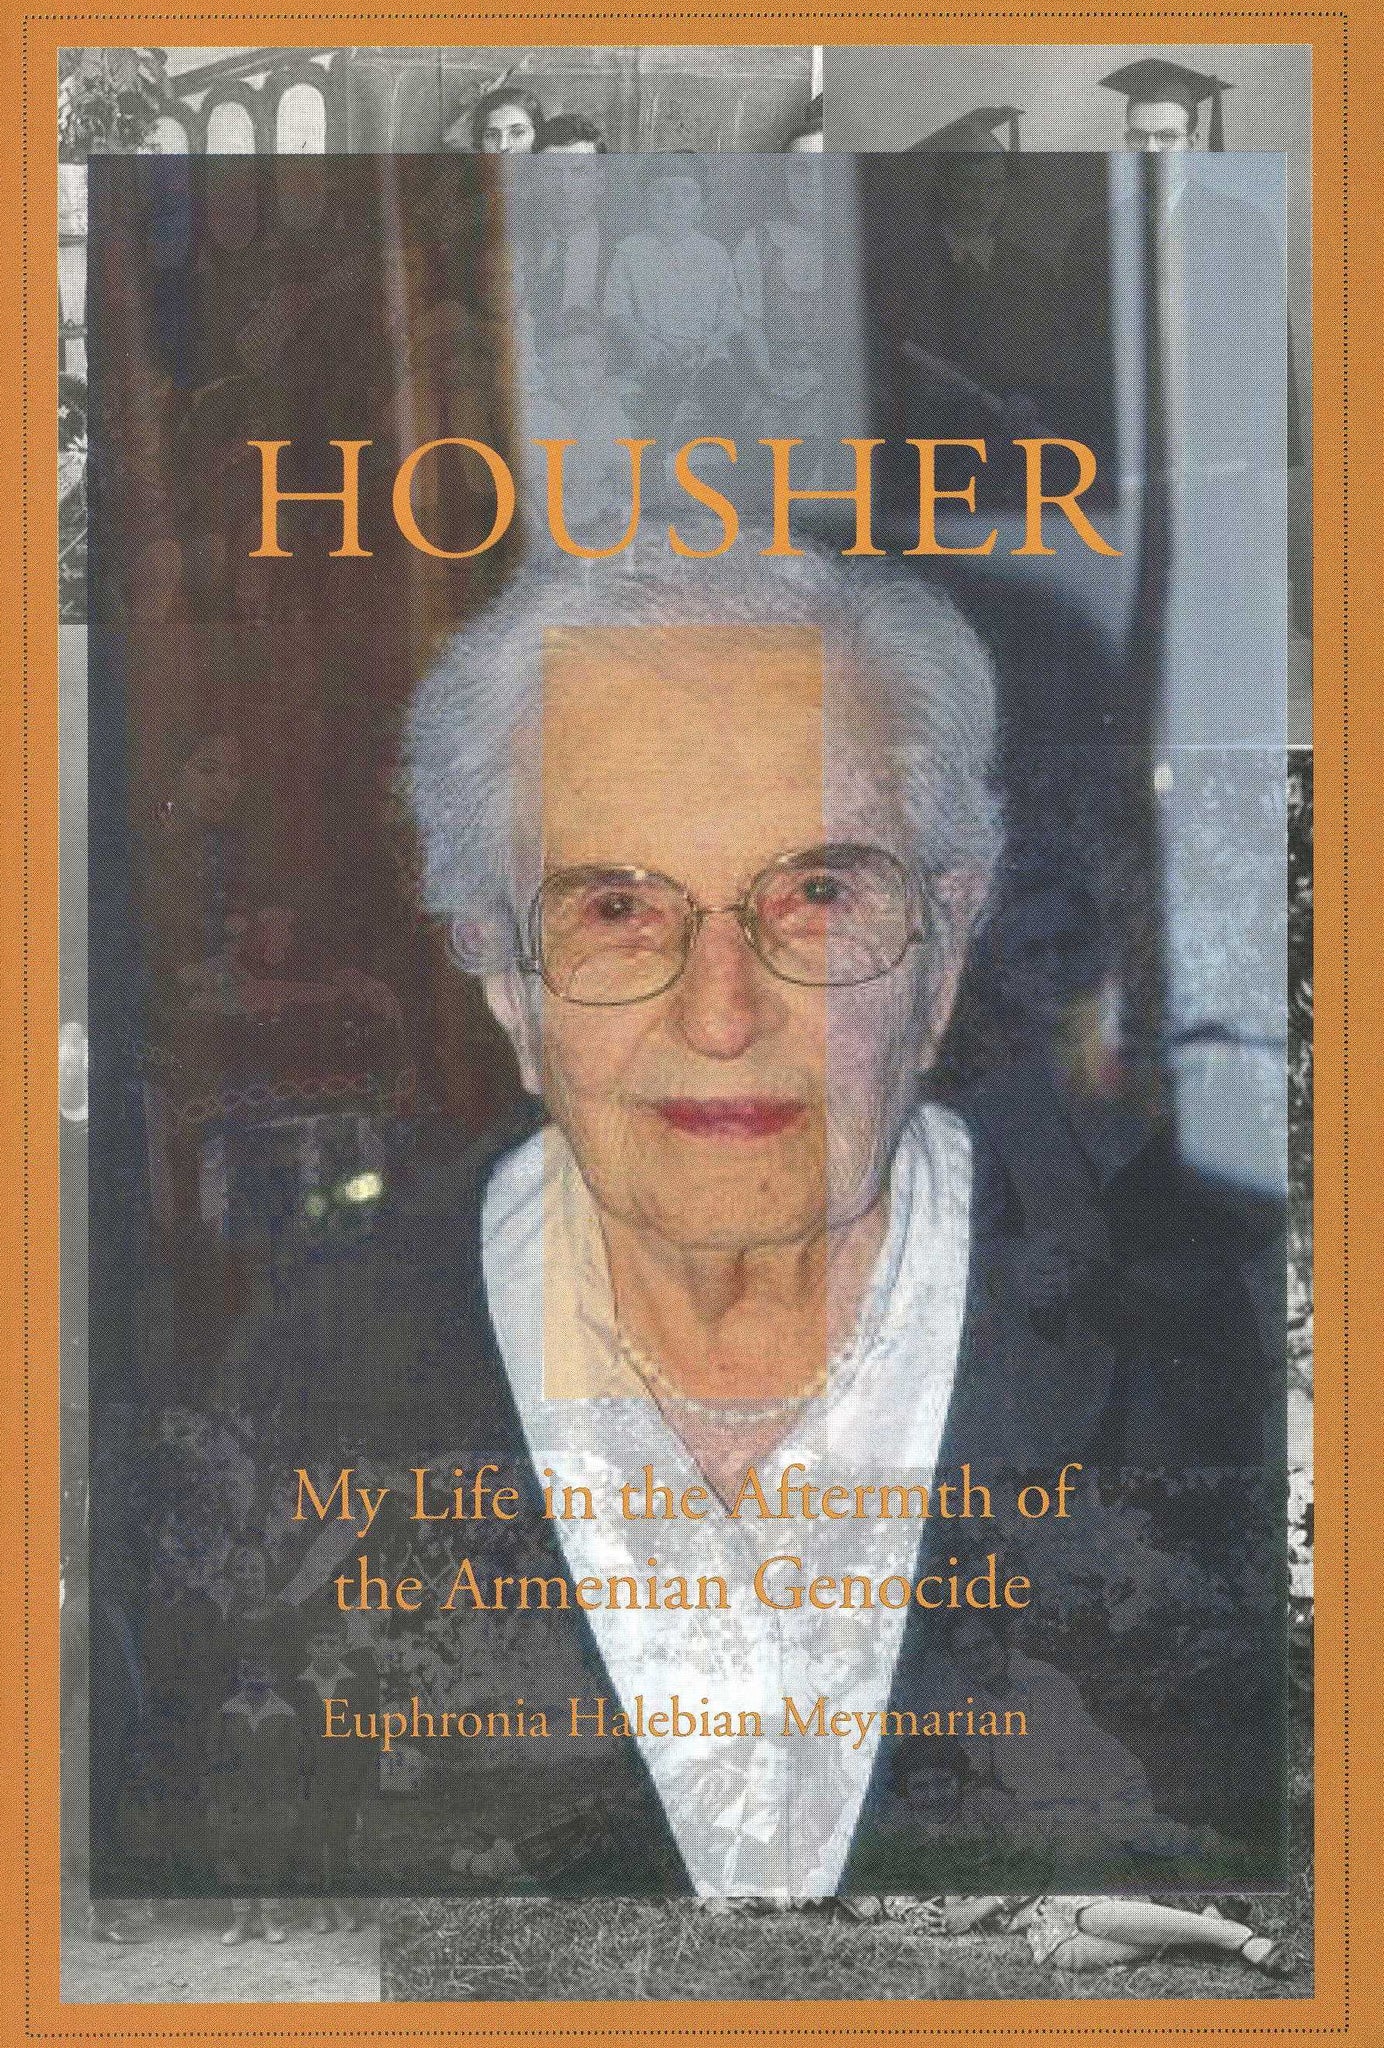 HOUSHER: My Life in the Aftermath of the Armenian Genocide